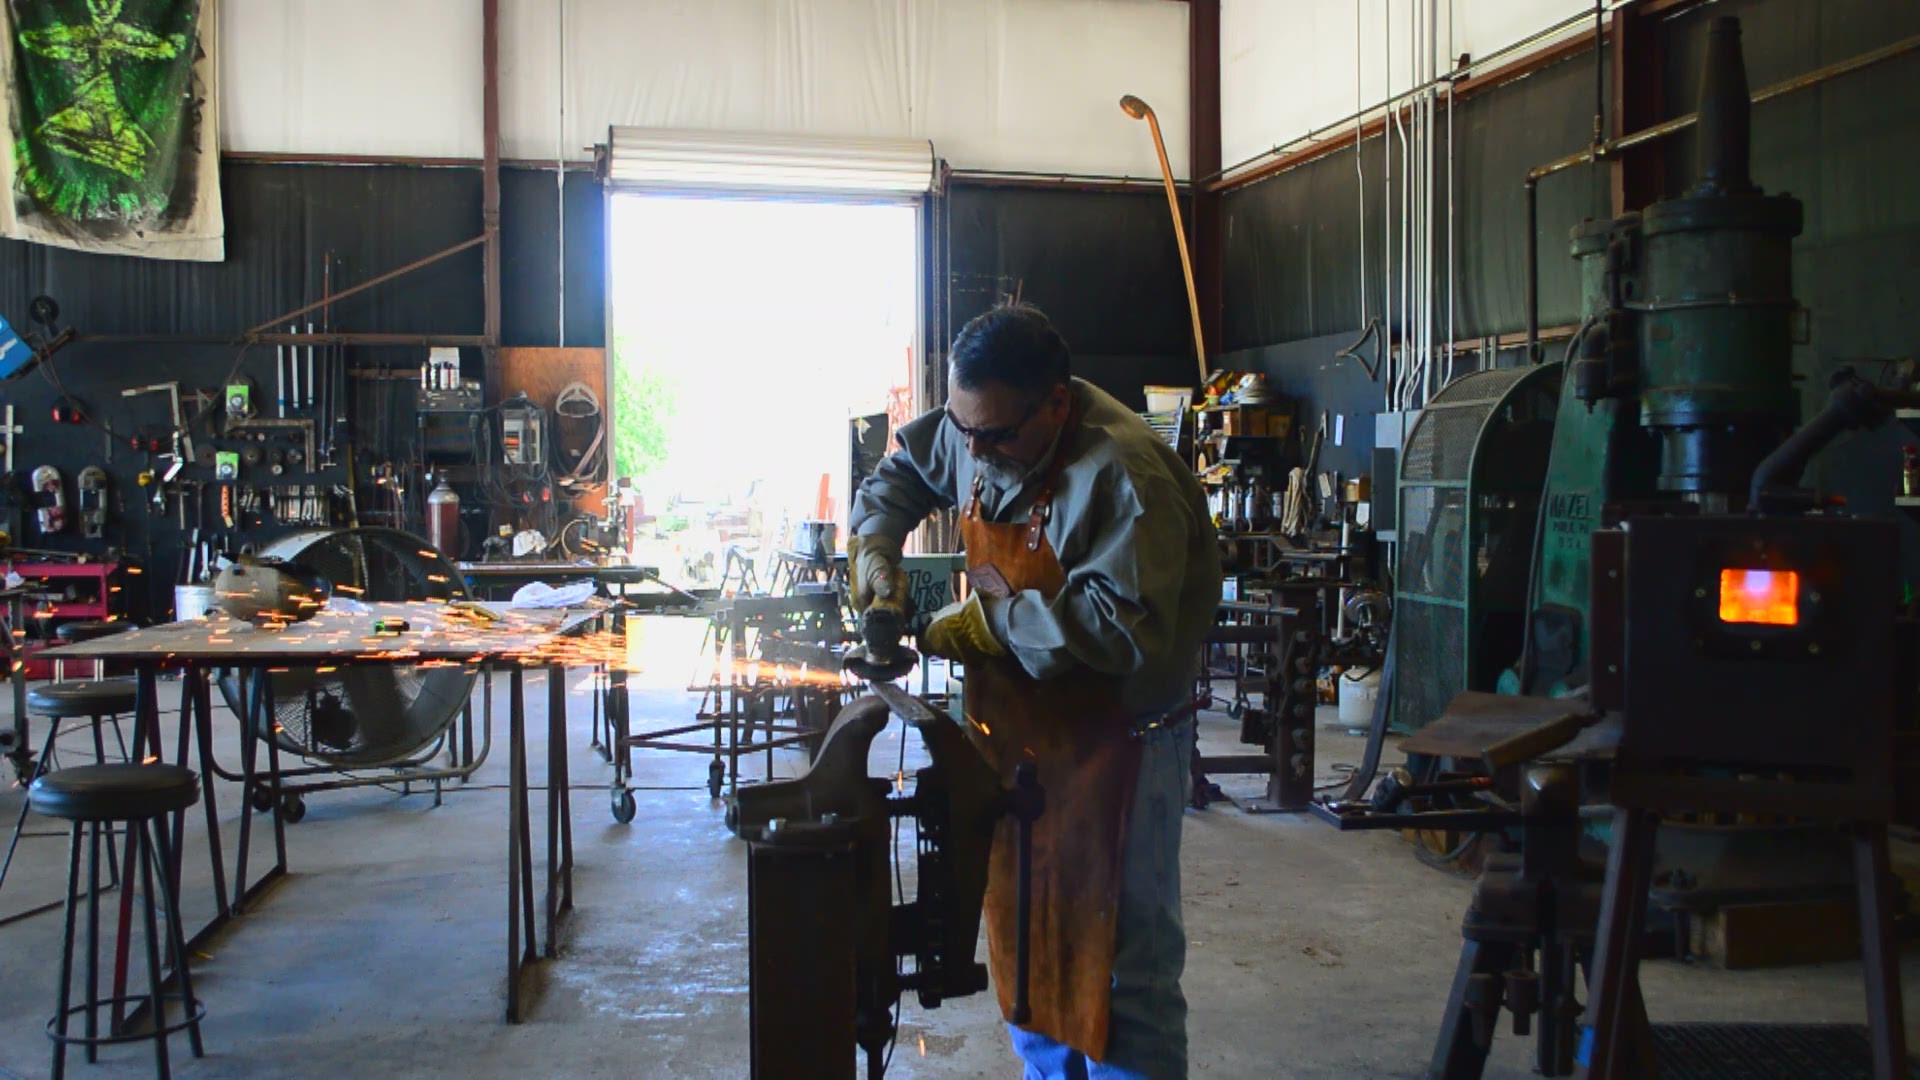 This College Station bladesmith has made thousands of knives since he began forging in 1985.